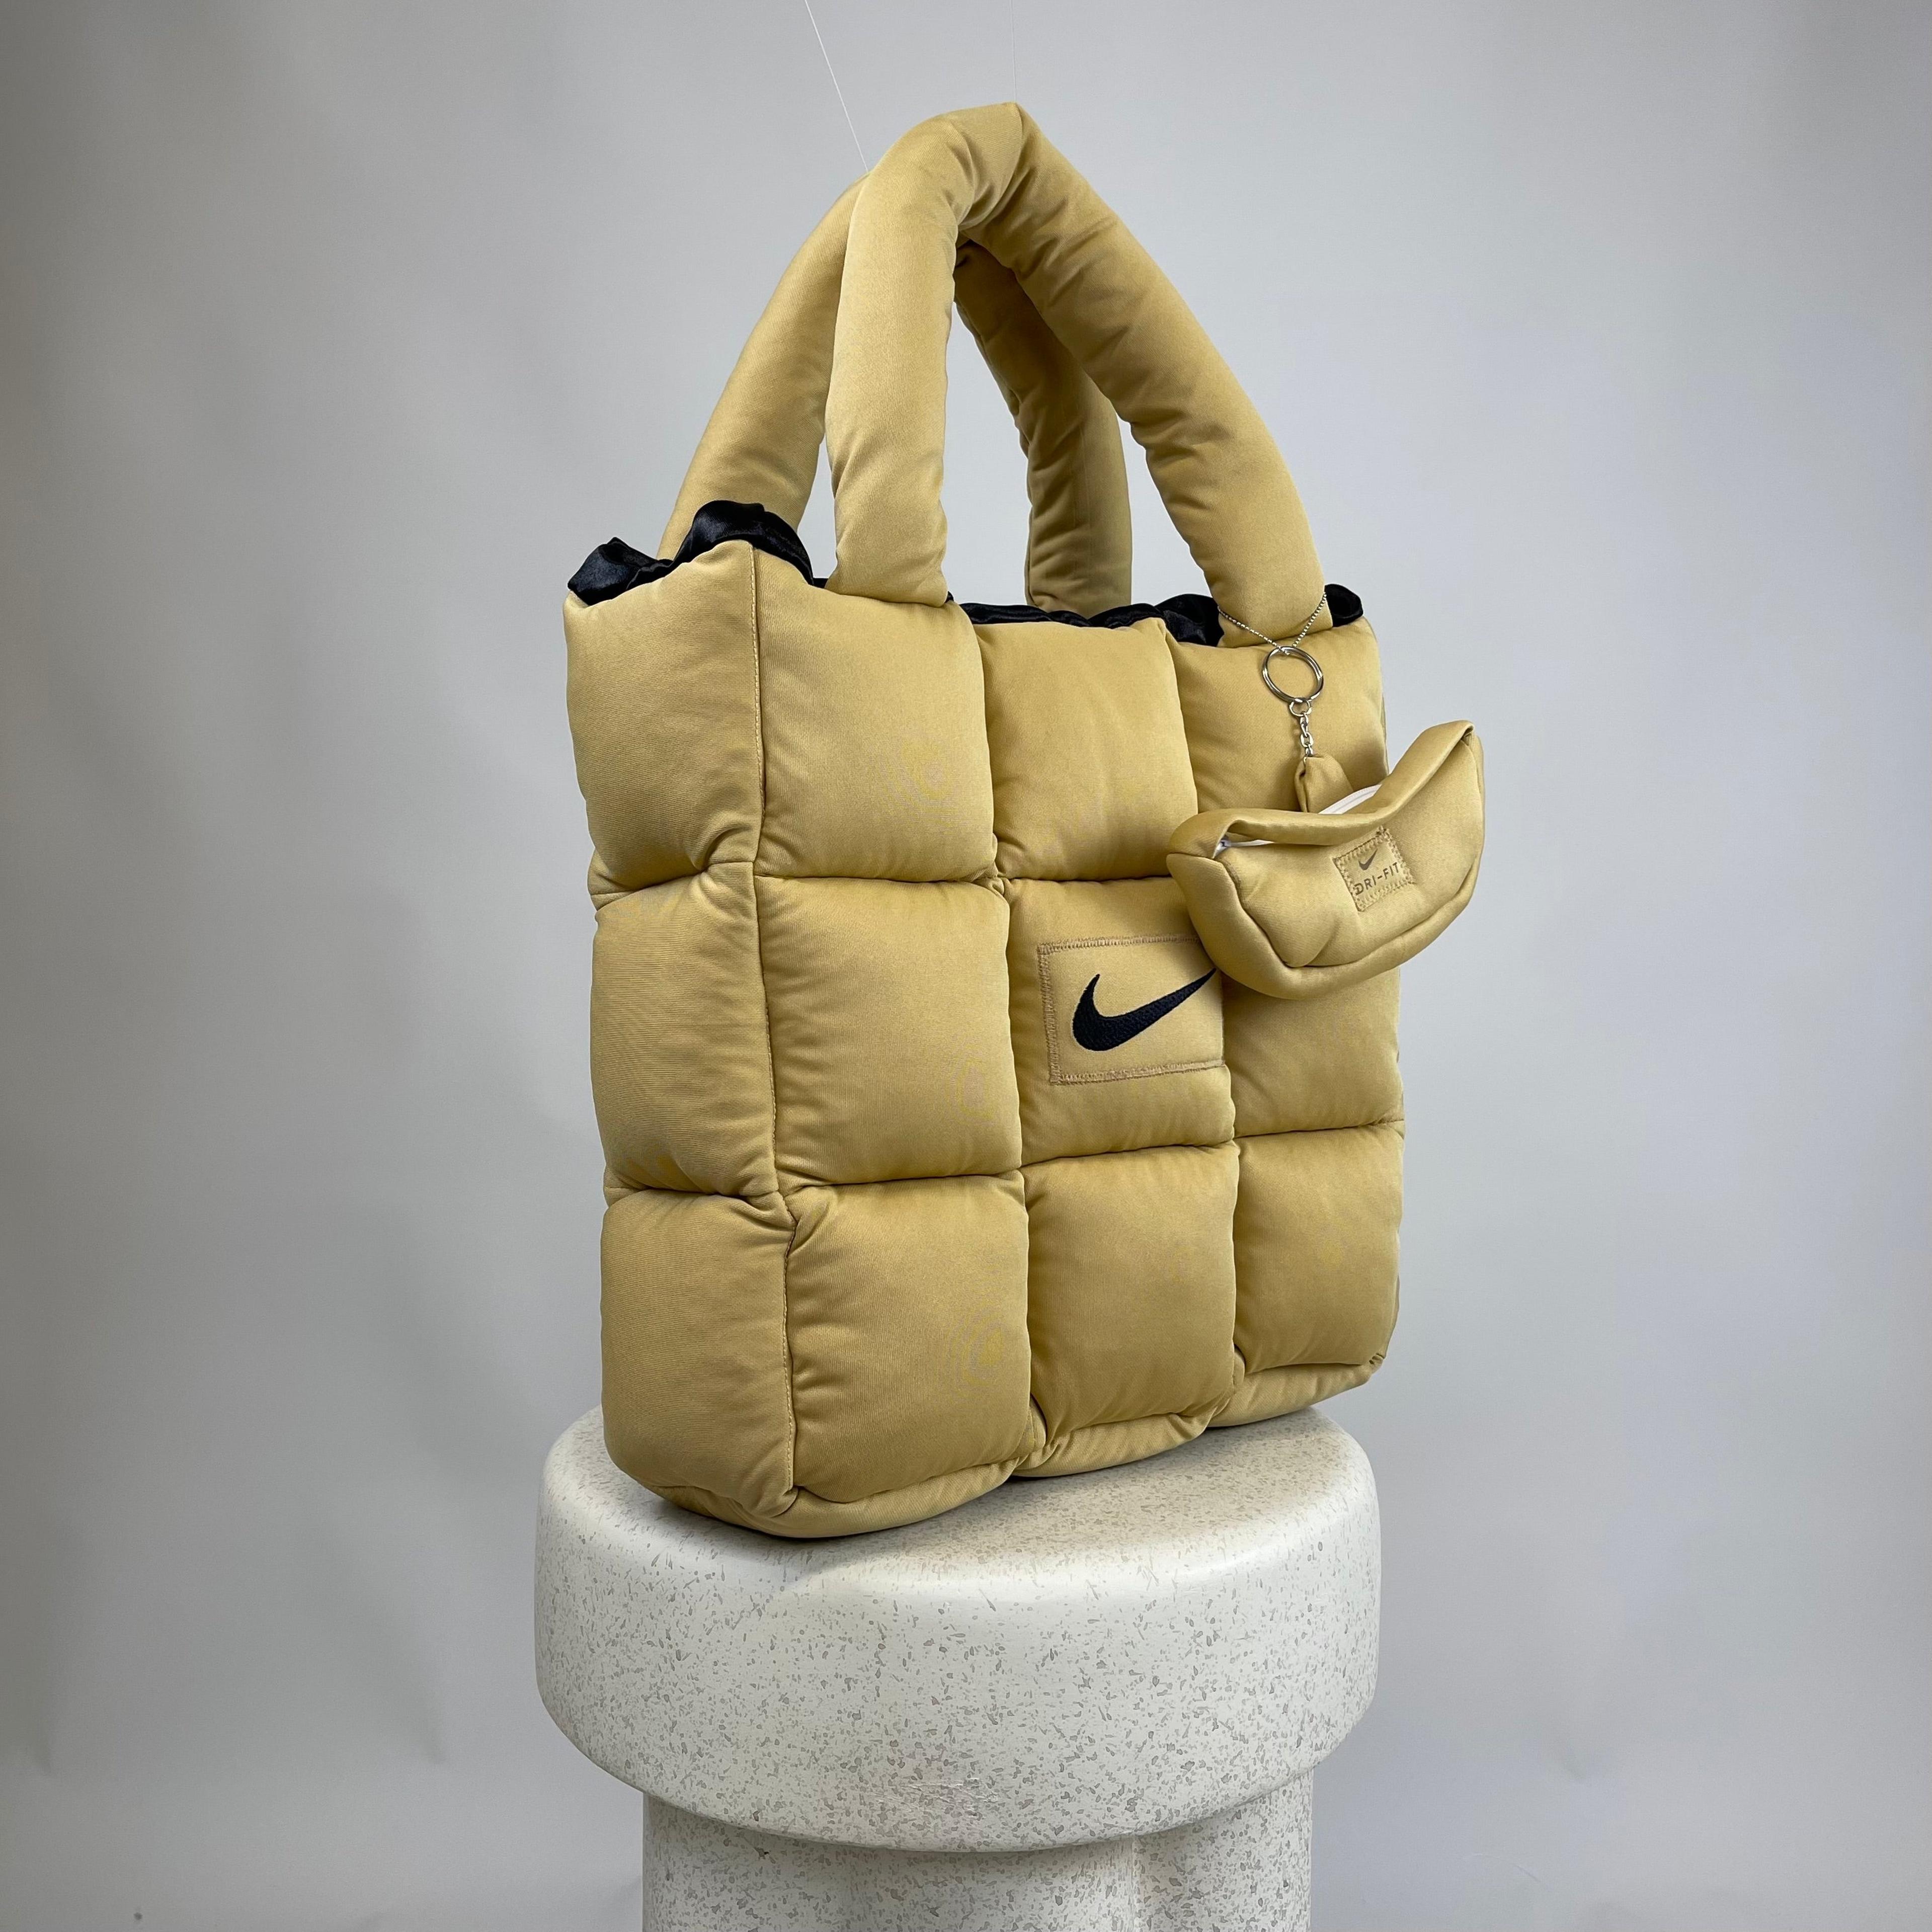 Boss Up Gold Puffer Bag with Mini Bag